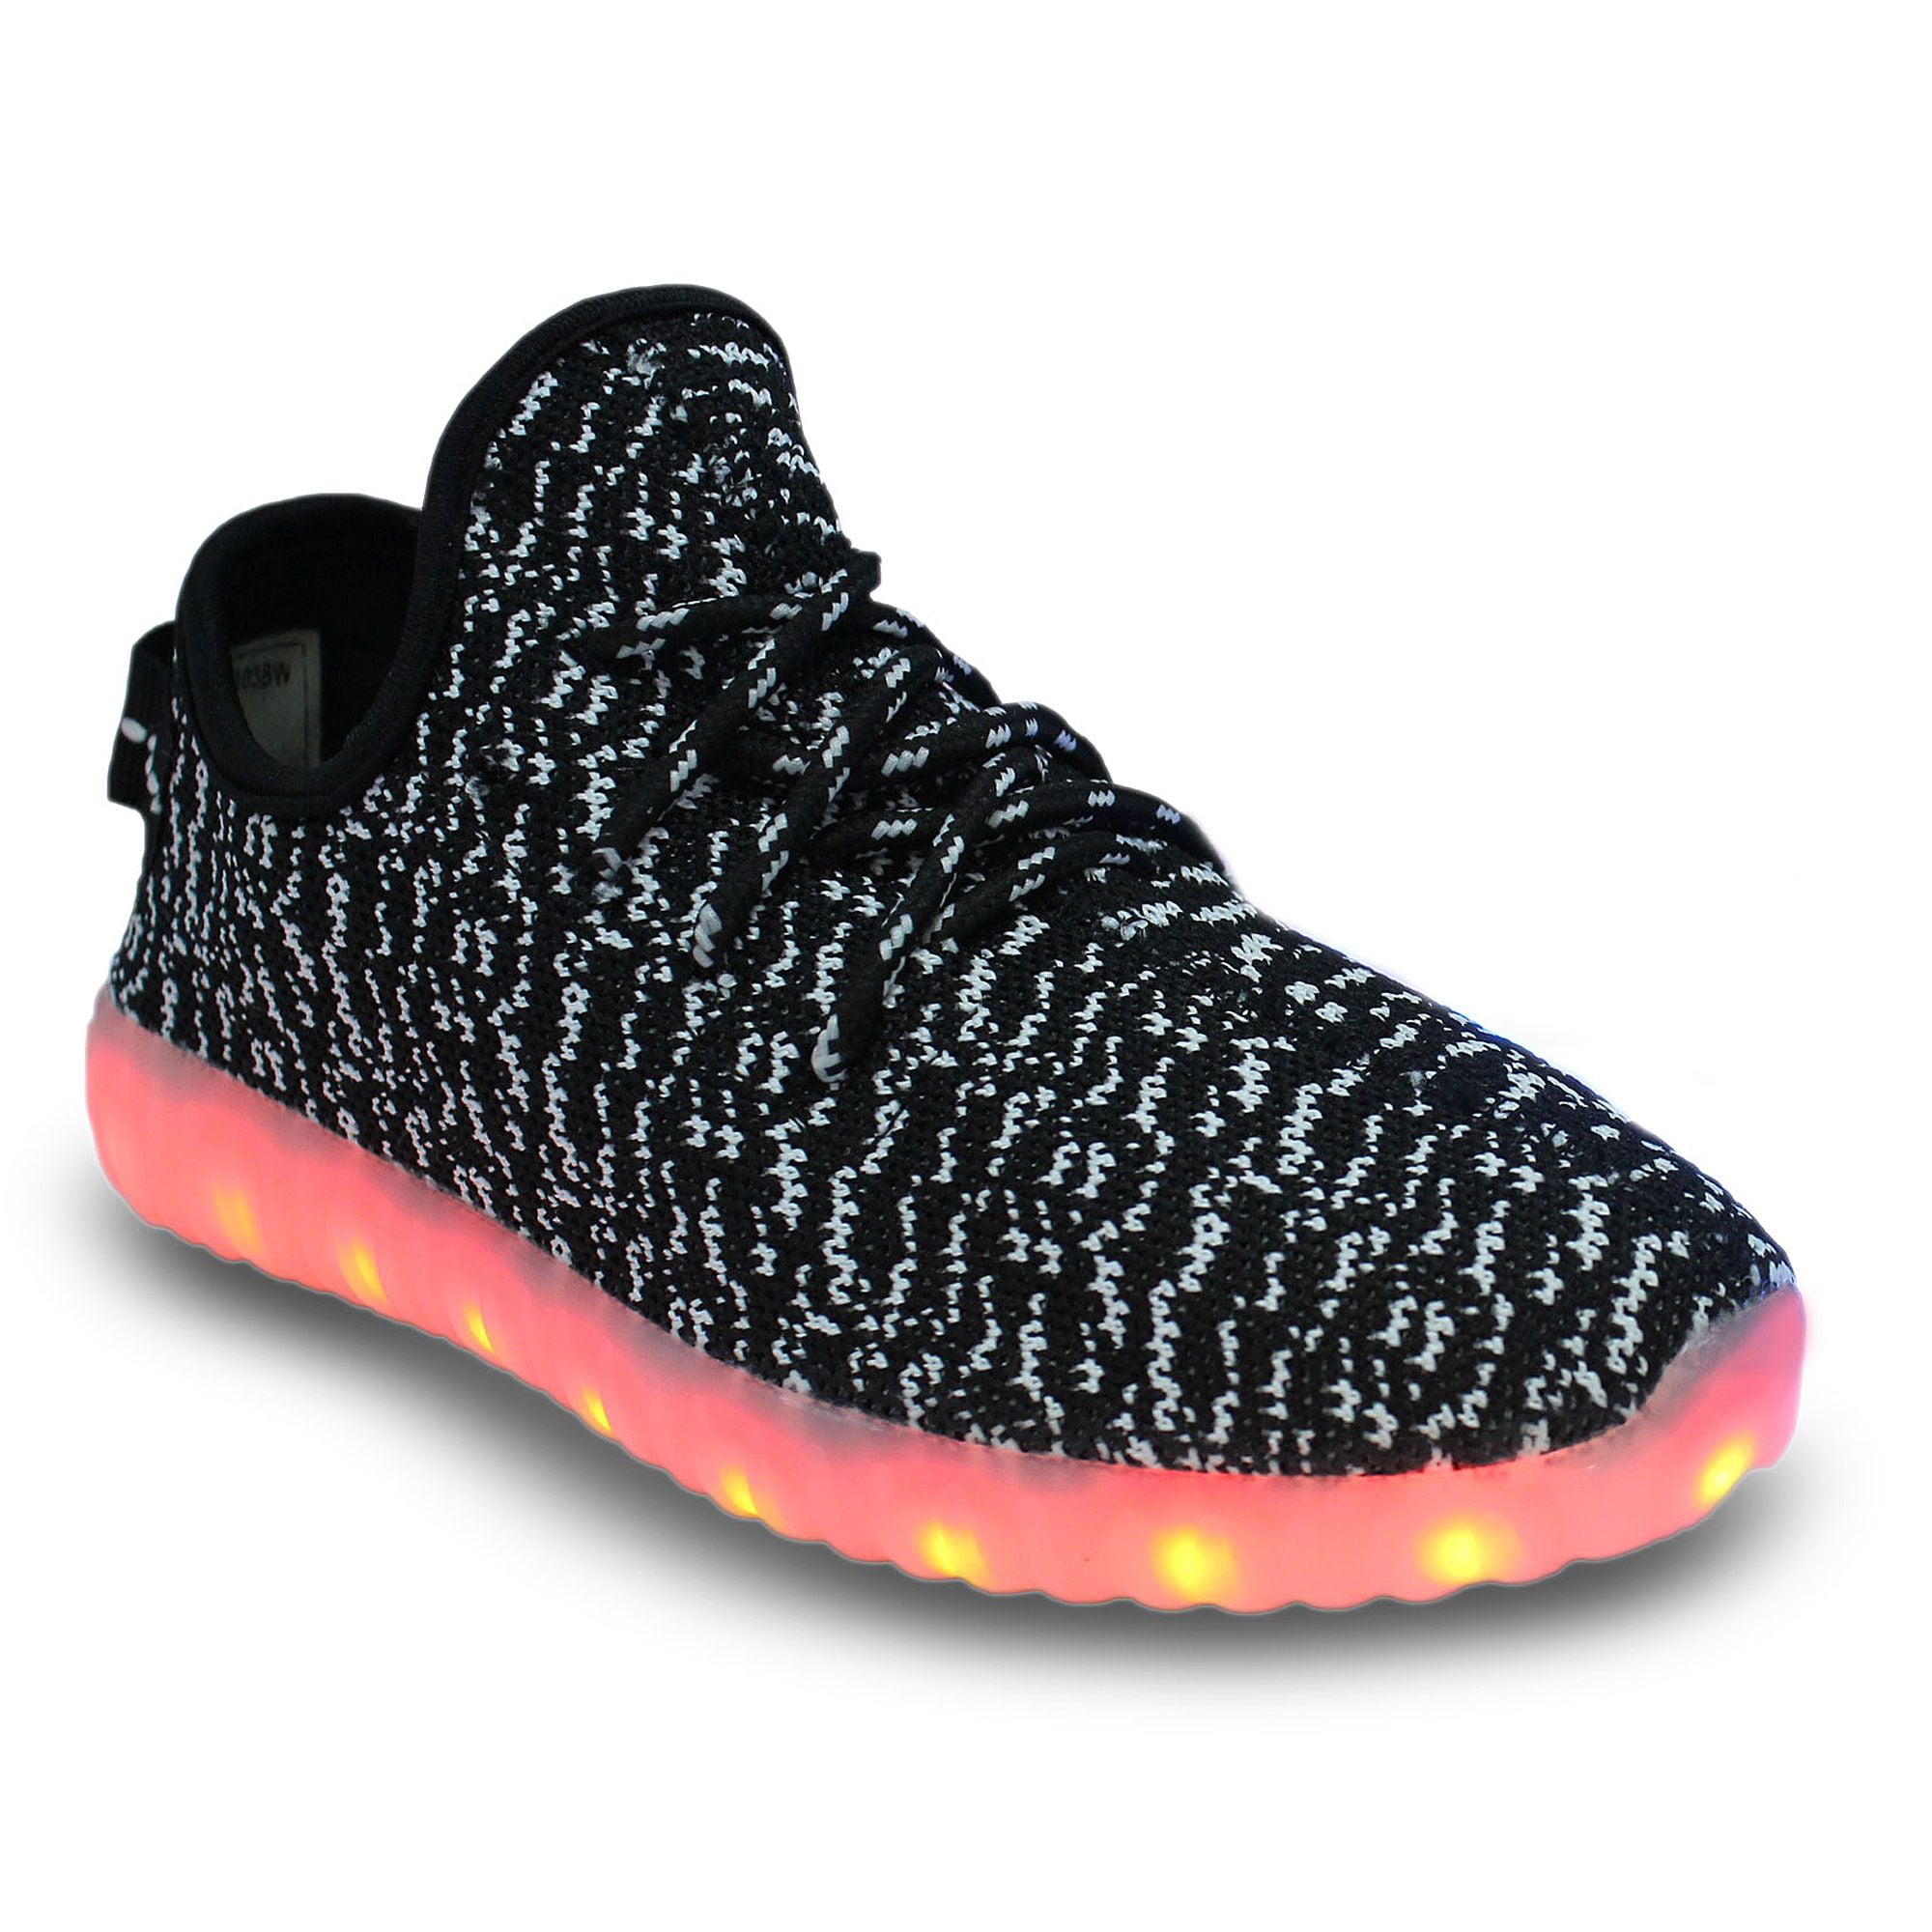 Discover more than 206 womens light up sneakers best